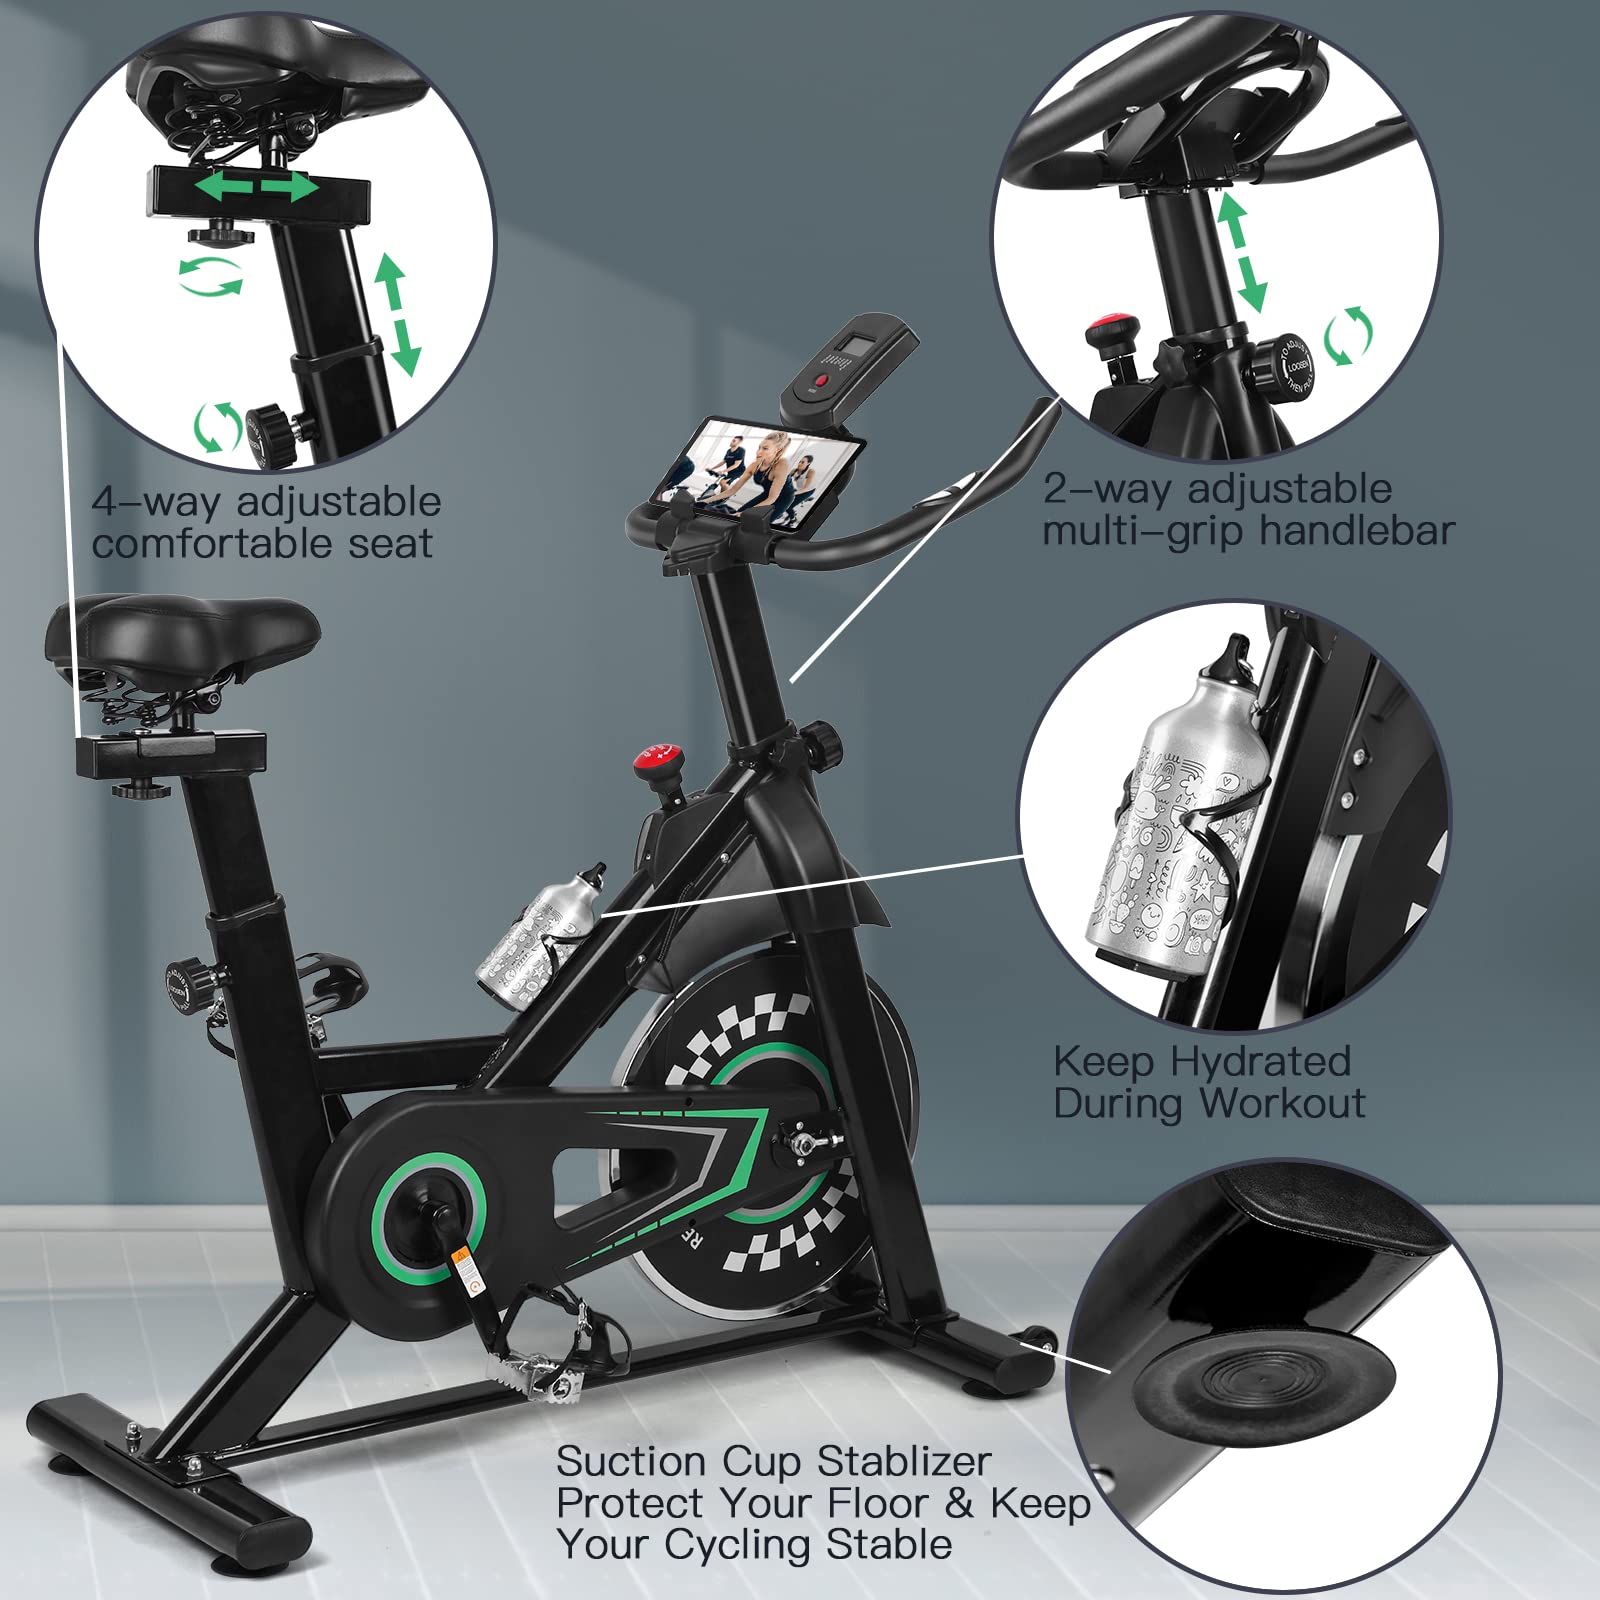 REHOOPEX Exercise Bike - Workout Equipment Stationary bikes for home,Silent Belt Drive Indoor Cycling Bike with Comfortable Seat Cushion and LCD Monitor for Home Workout